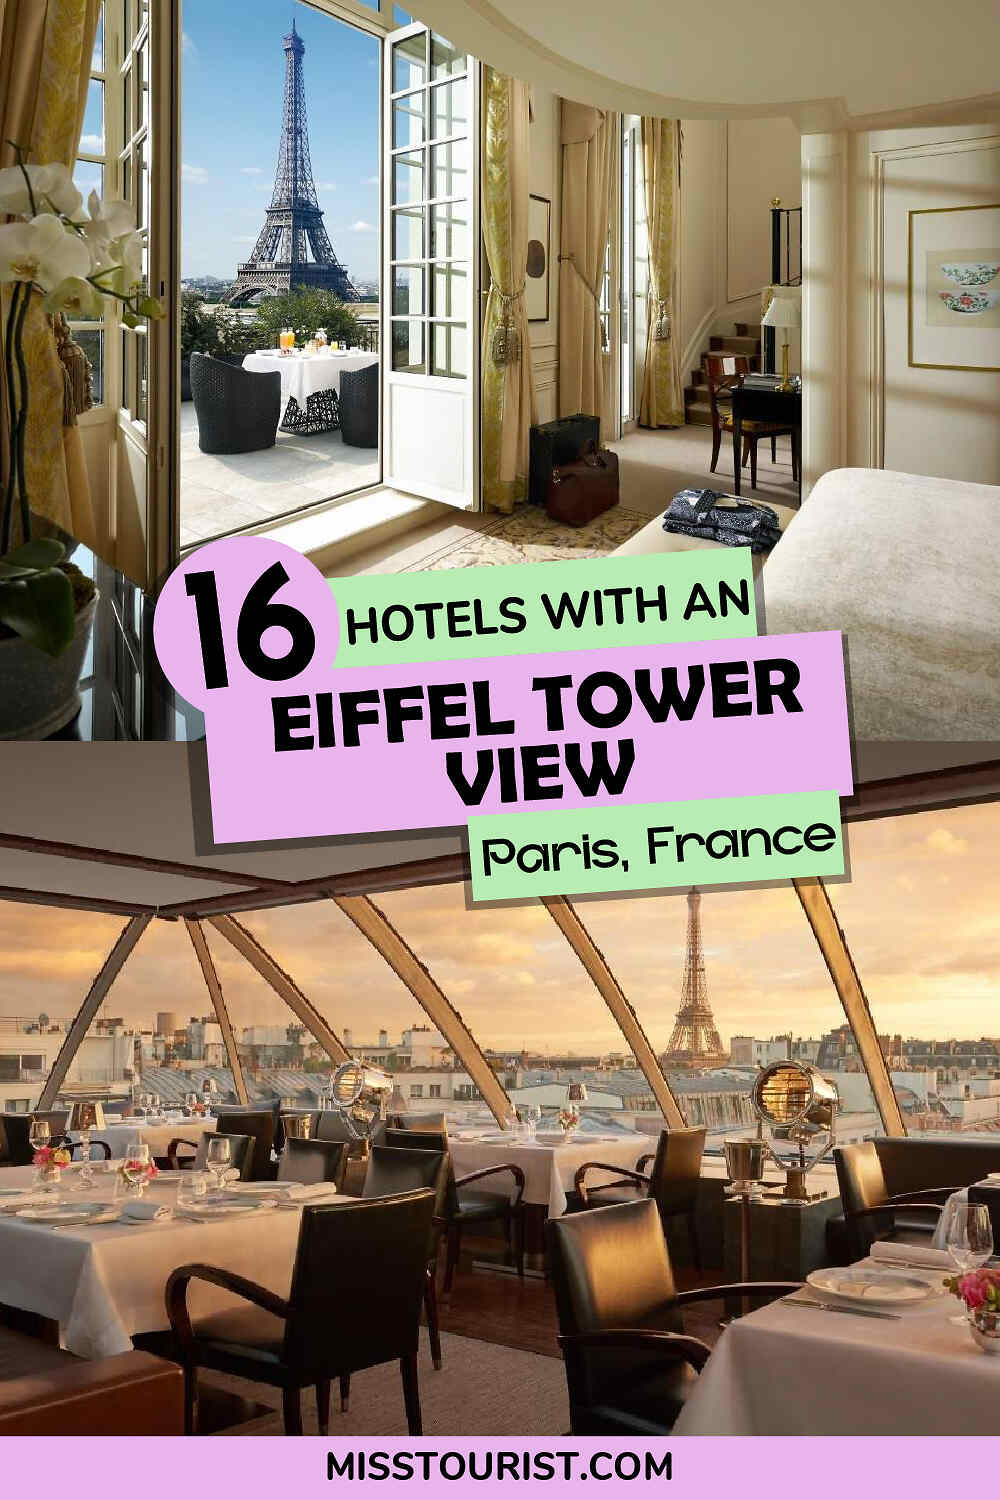 Paris hotel with Eiffel Tower view PIN 1